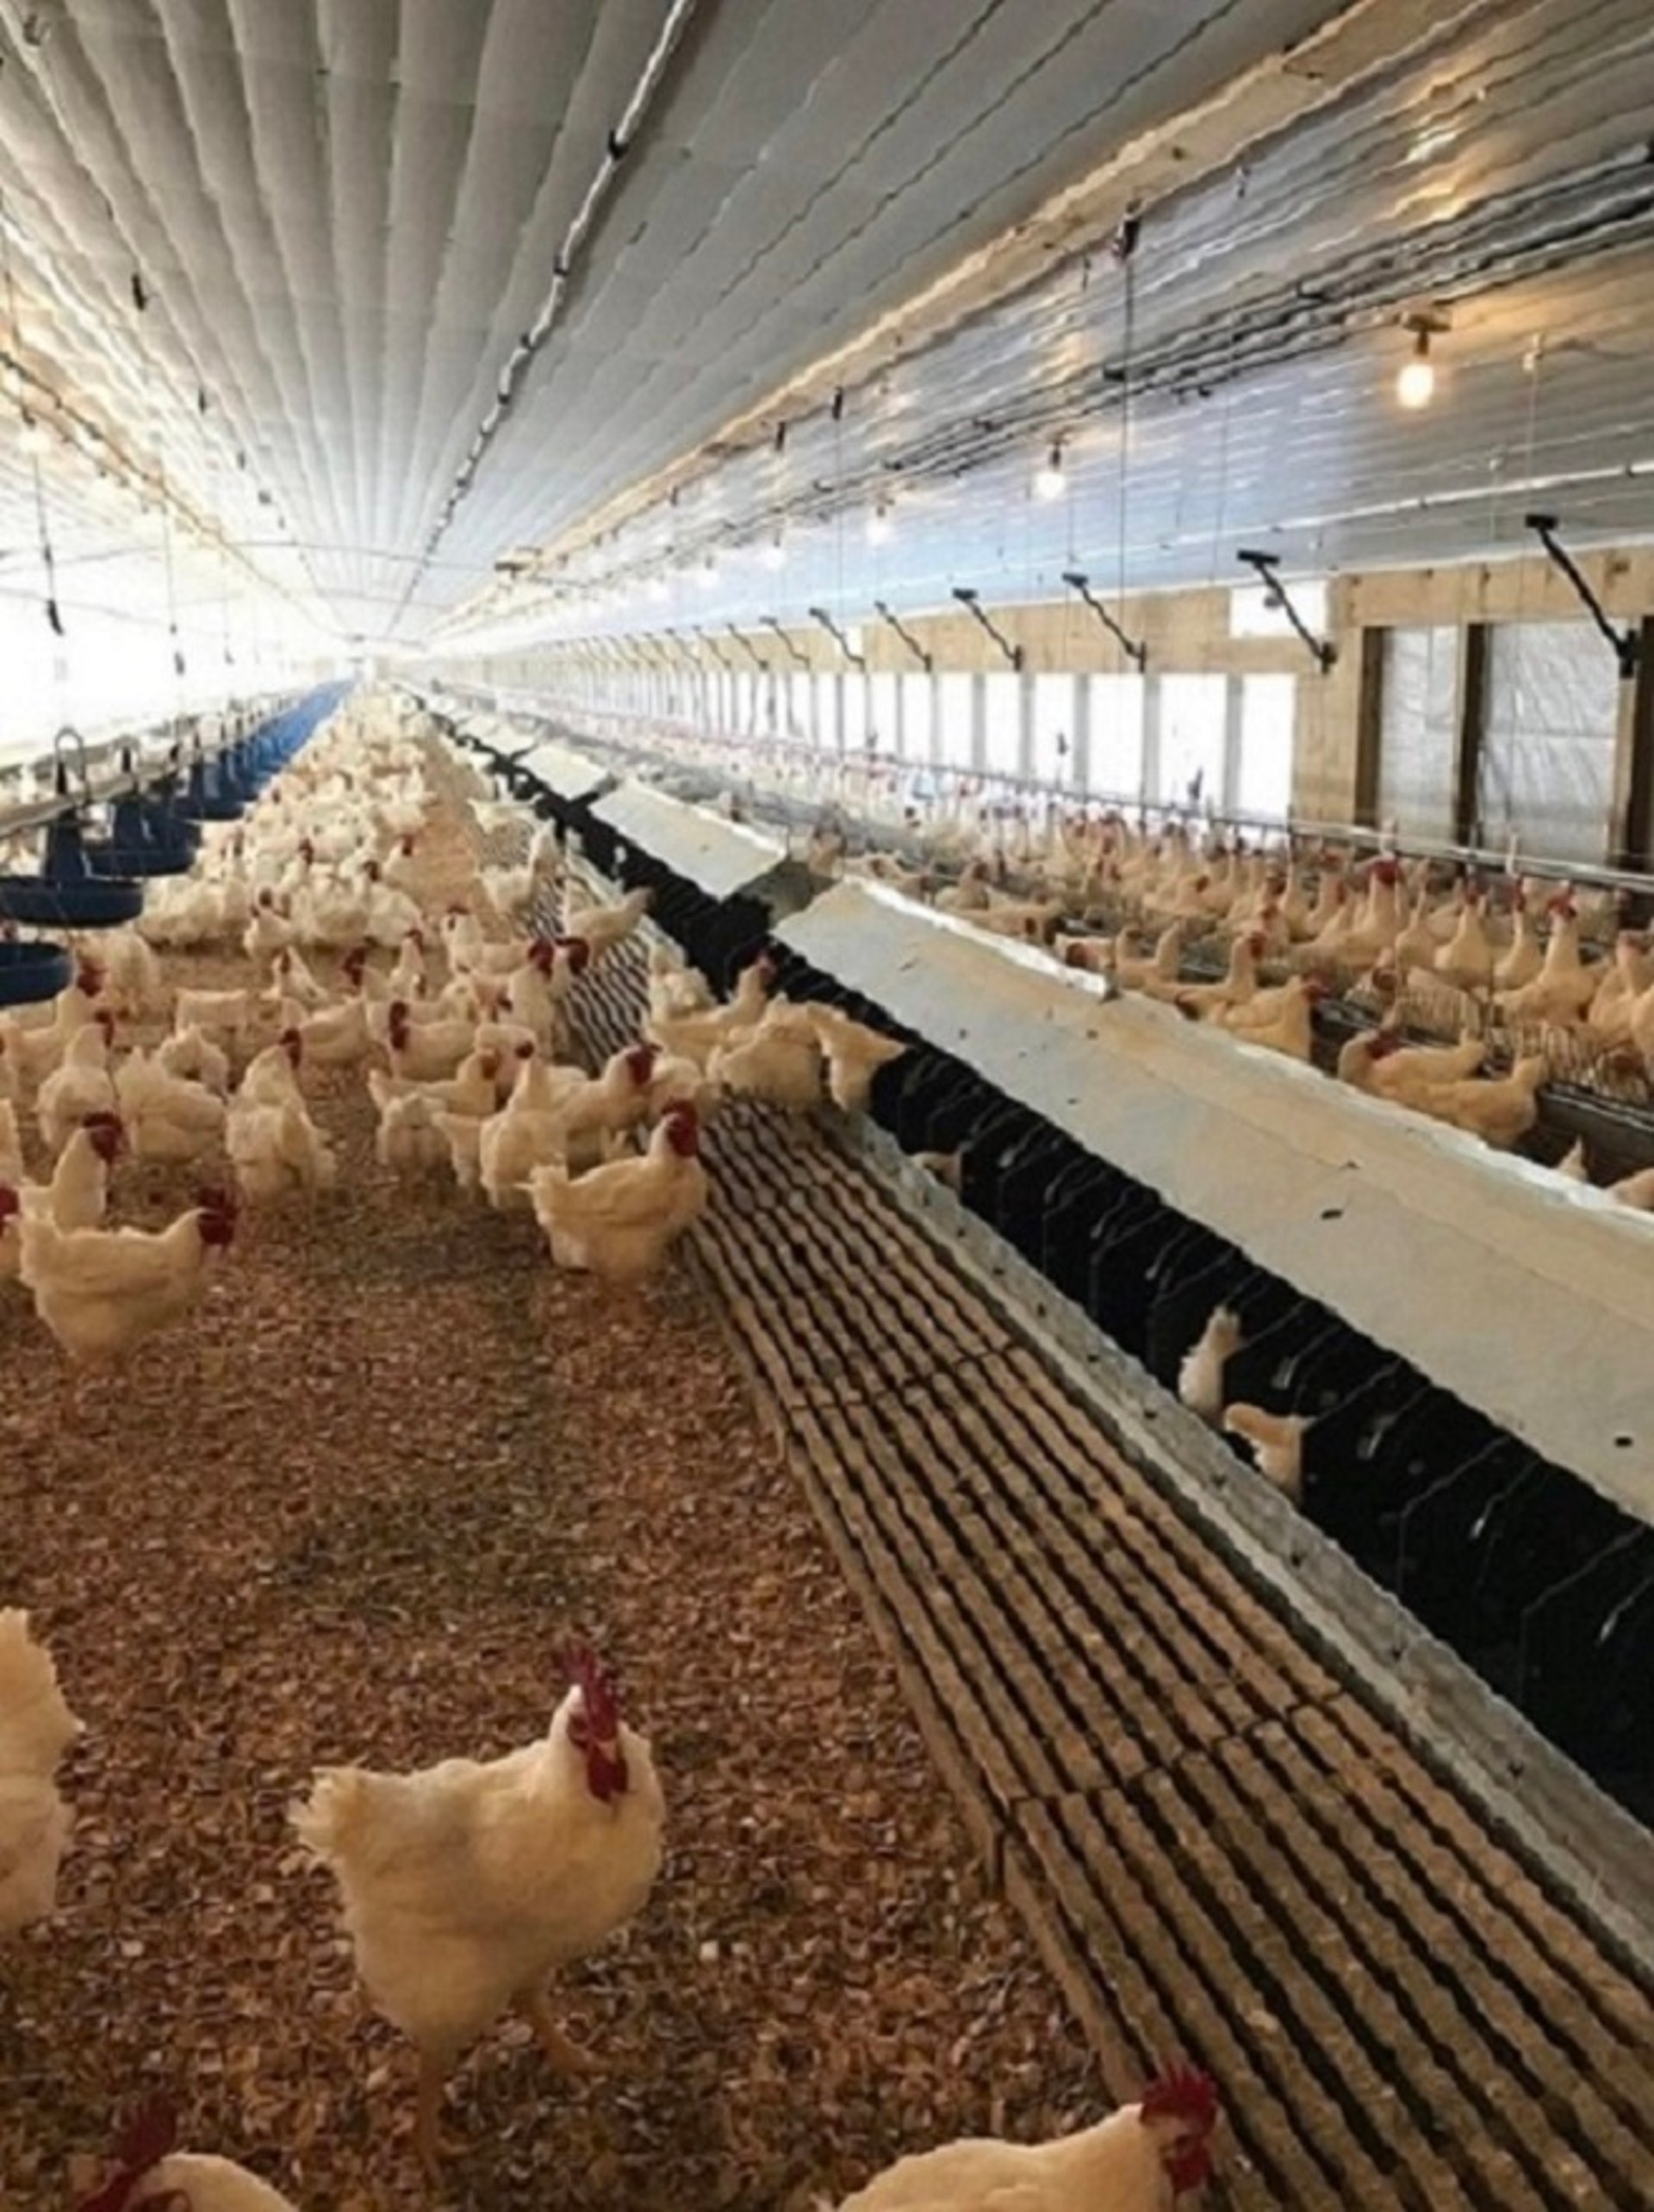 Typical broiler breeder house